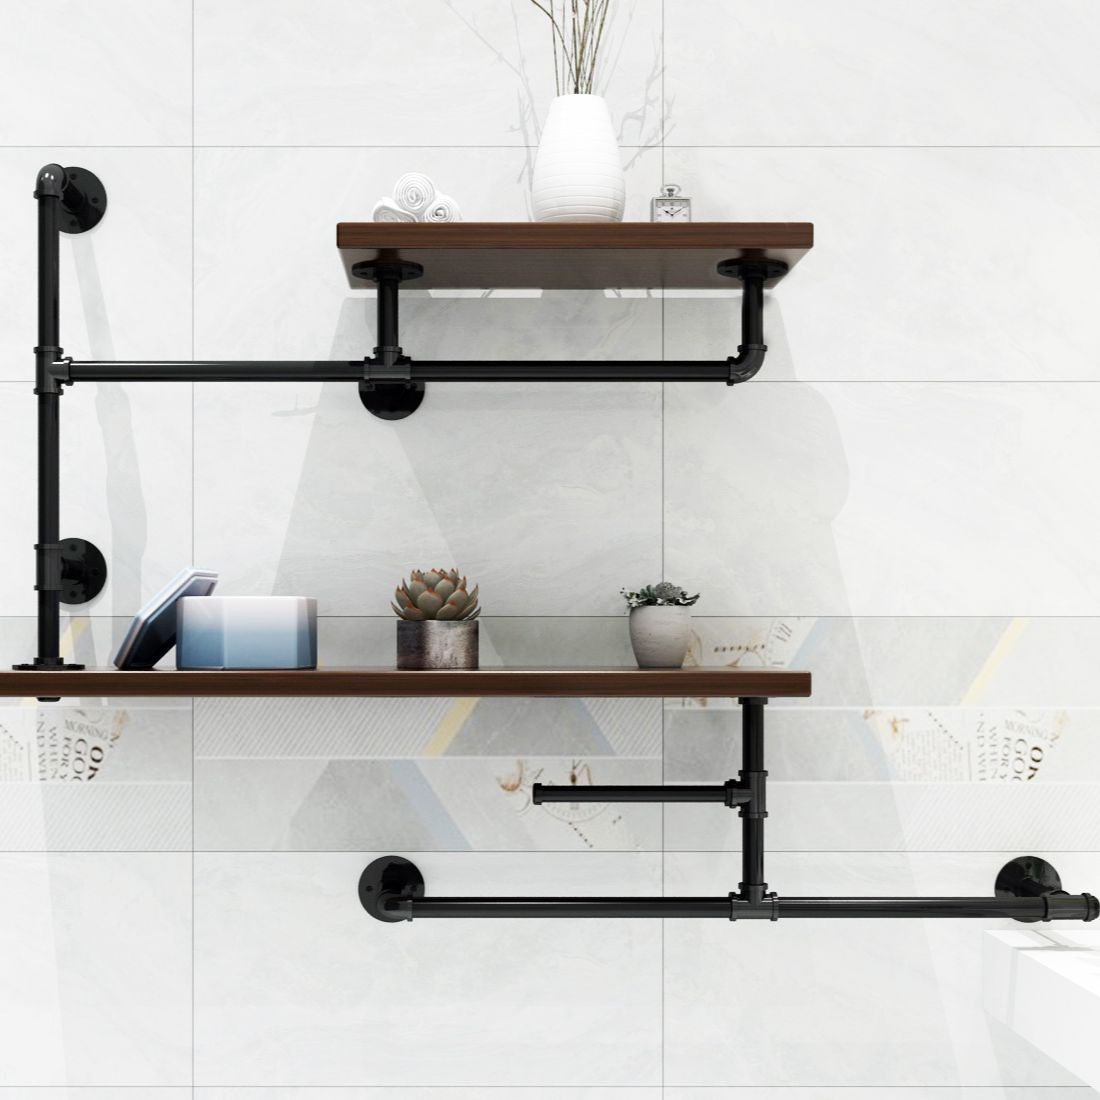 32" Industrial Style Black Pumbing Pipe with 2 Shelves